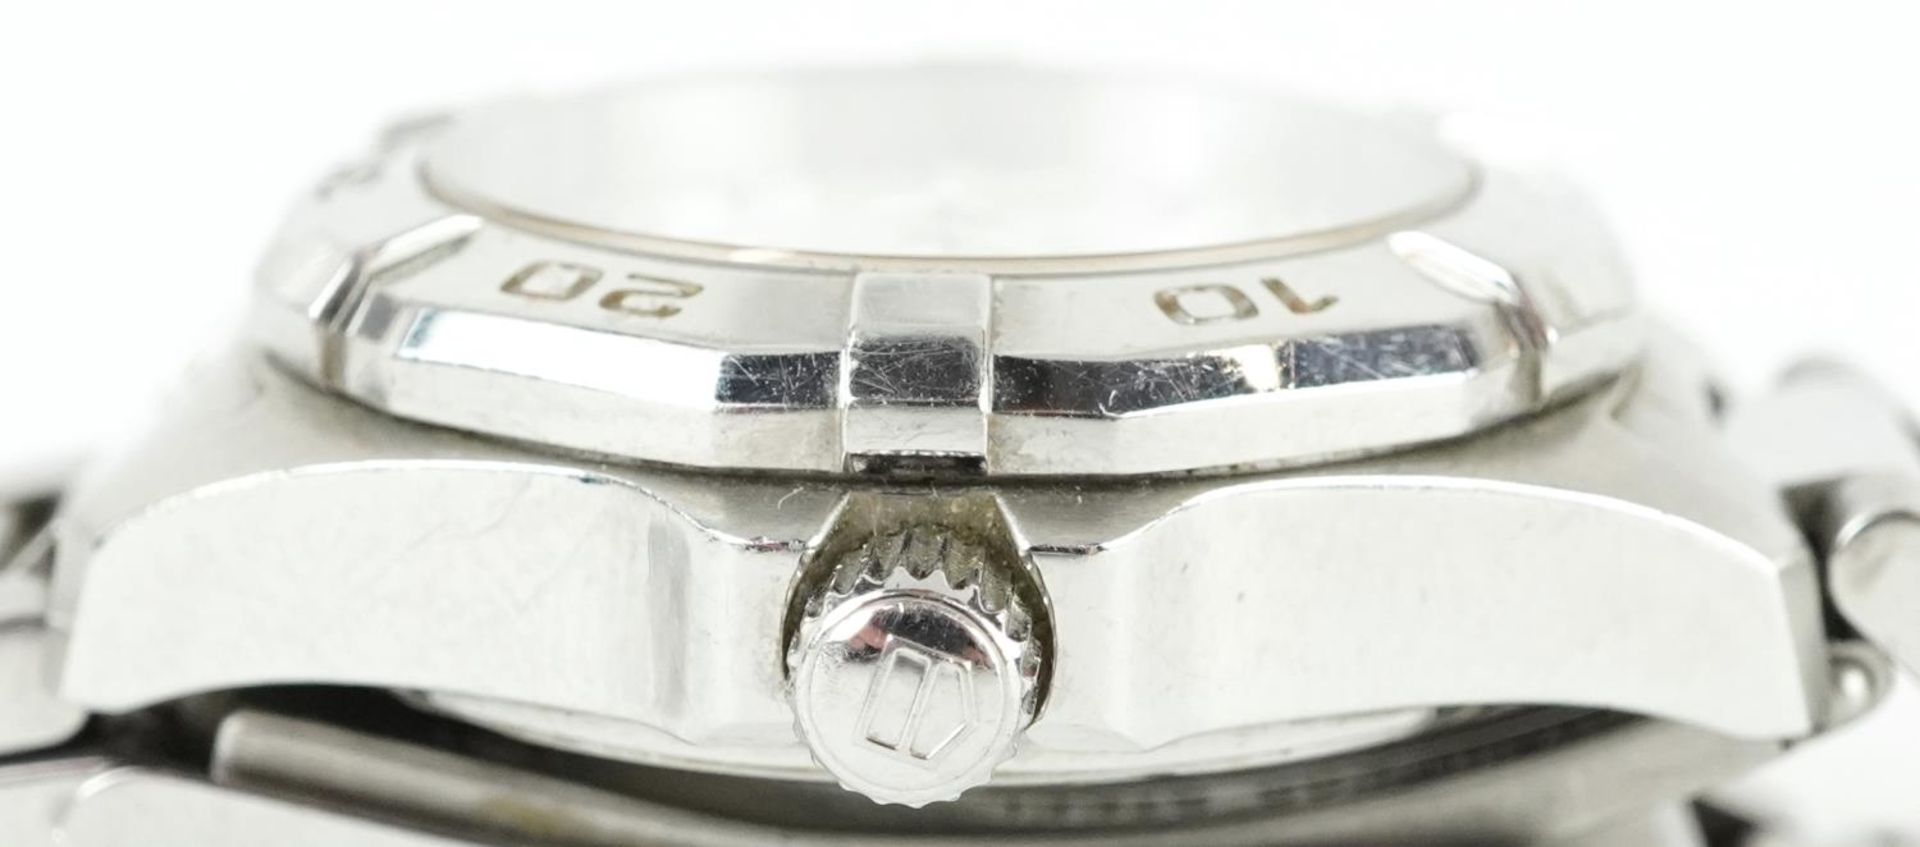 Tag Heuer, ladies Tag Heuer Aquaracer wristwatch having a diamond set mother of pearl dial with date - Image 7 of 9